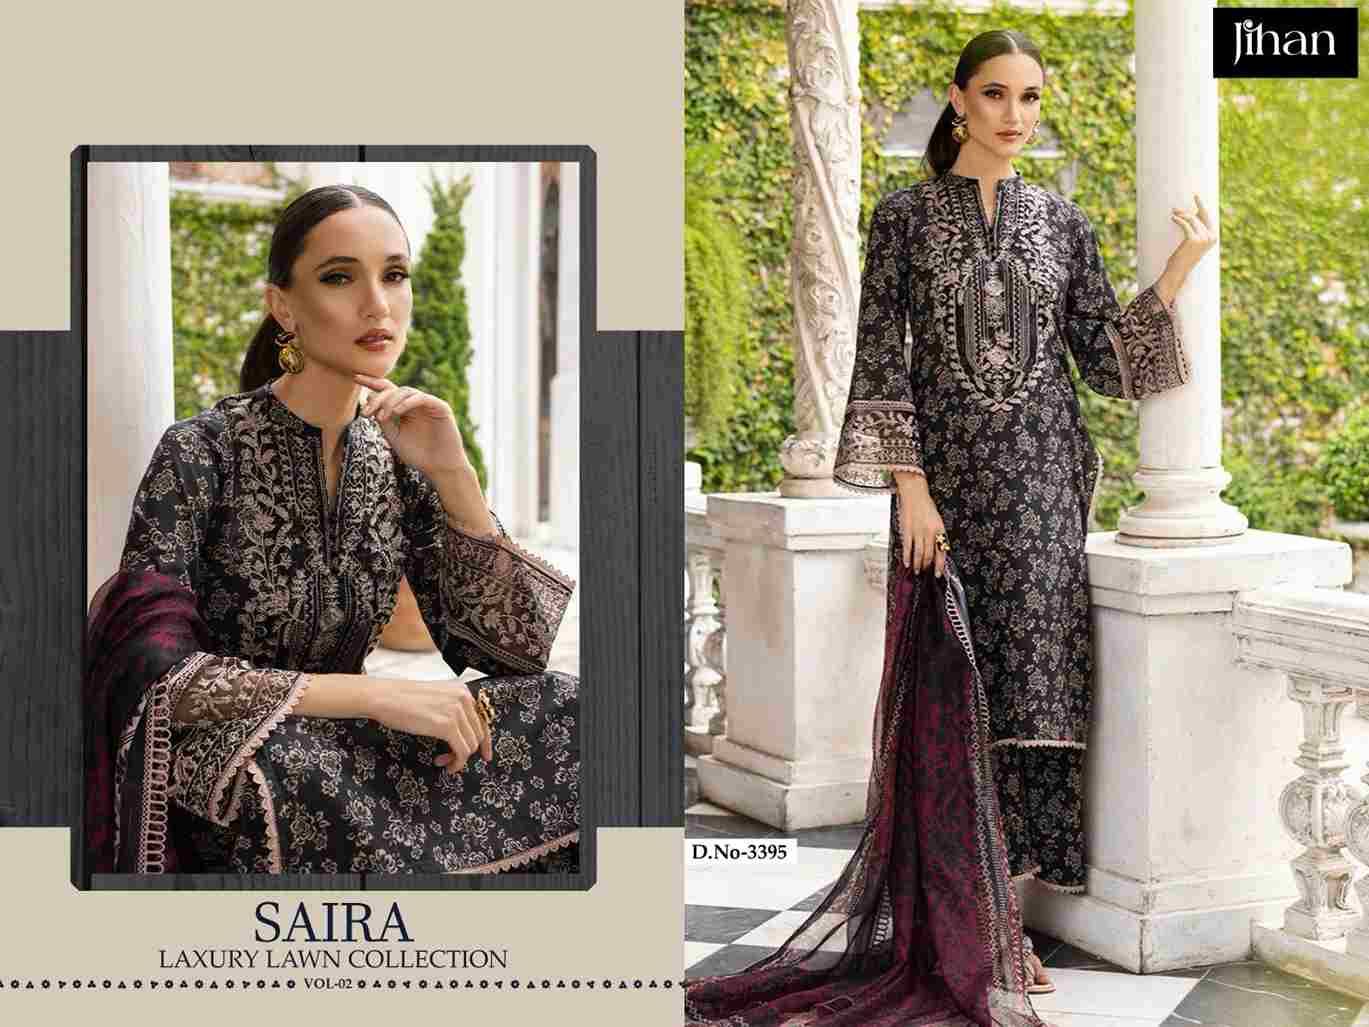 Saira Luxury Lawn Collection Vol-2 By Jihan 3393 To 3396 Series Designer Pakistani Suits Beautiful Stylish Fancy Colorful Party Wear & Occasional Wear Pure Cotton Lawn Dresses At Wholesale Price